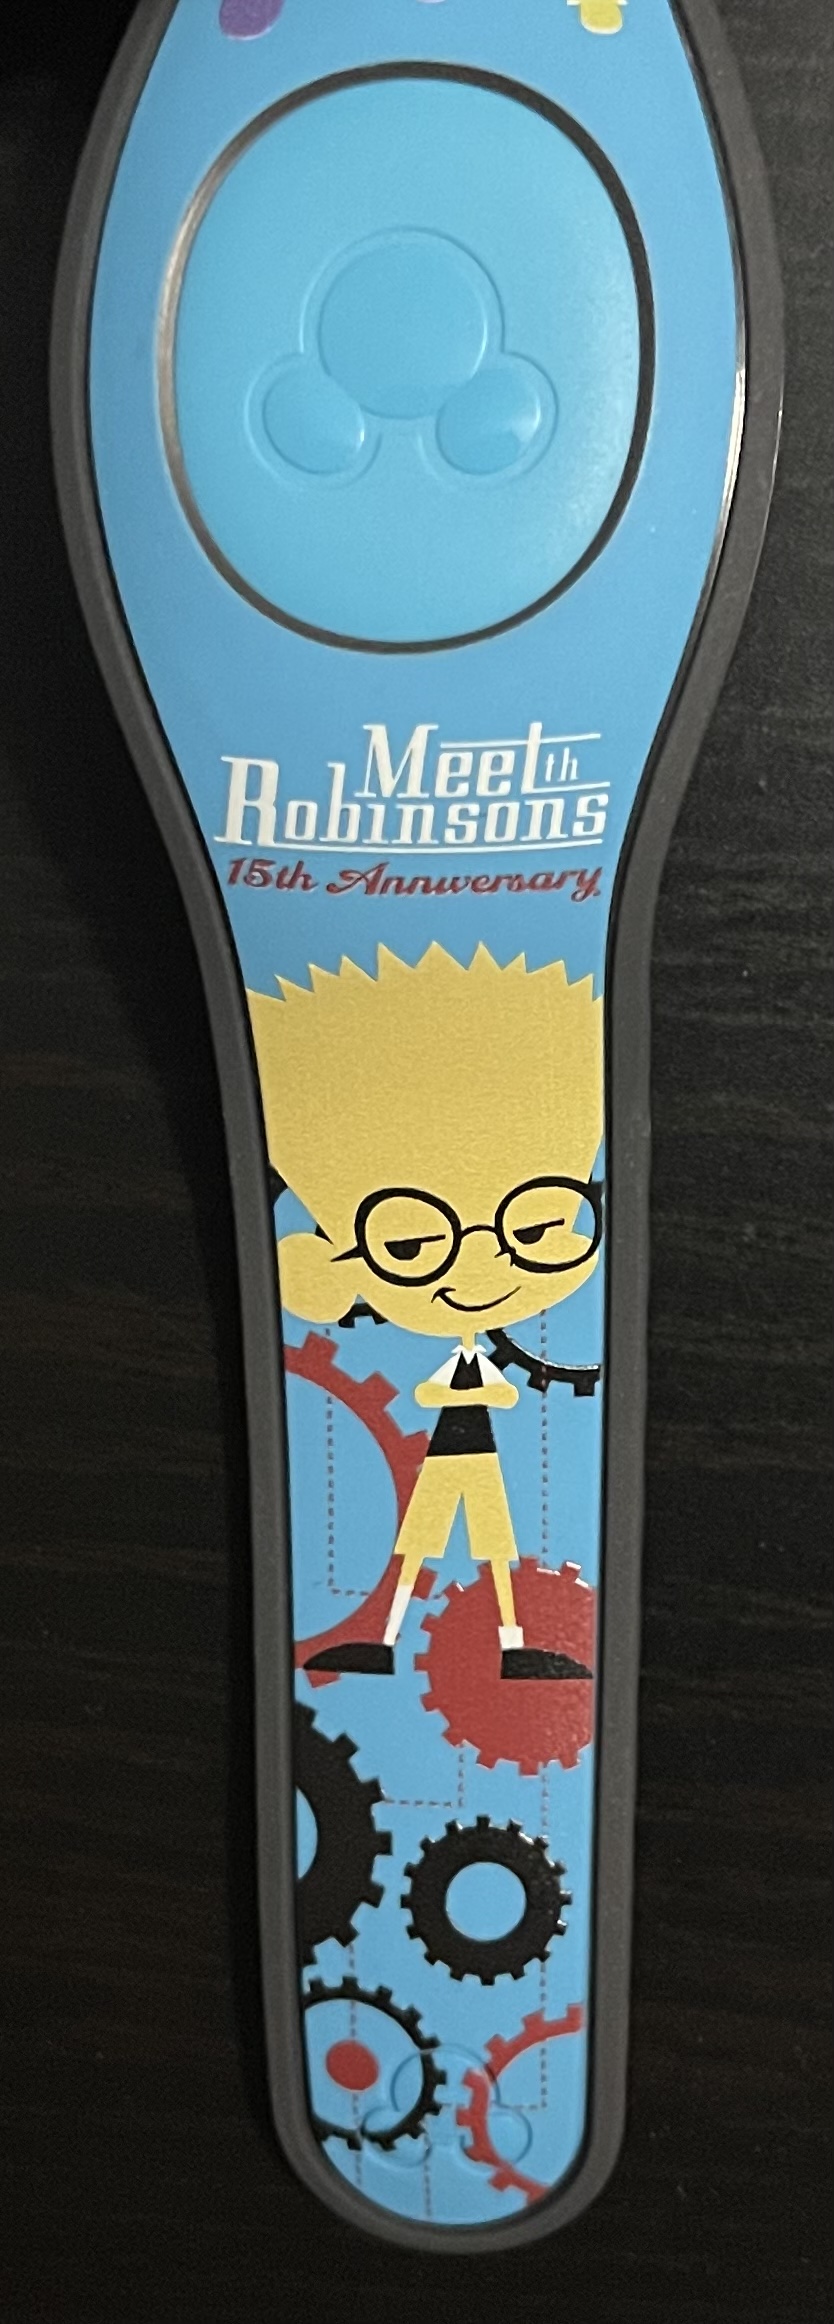 Meet the Robinsons 15th Anniversary Limited Edition 1000 MagicBand has been released today